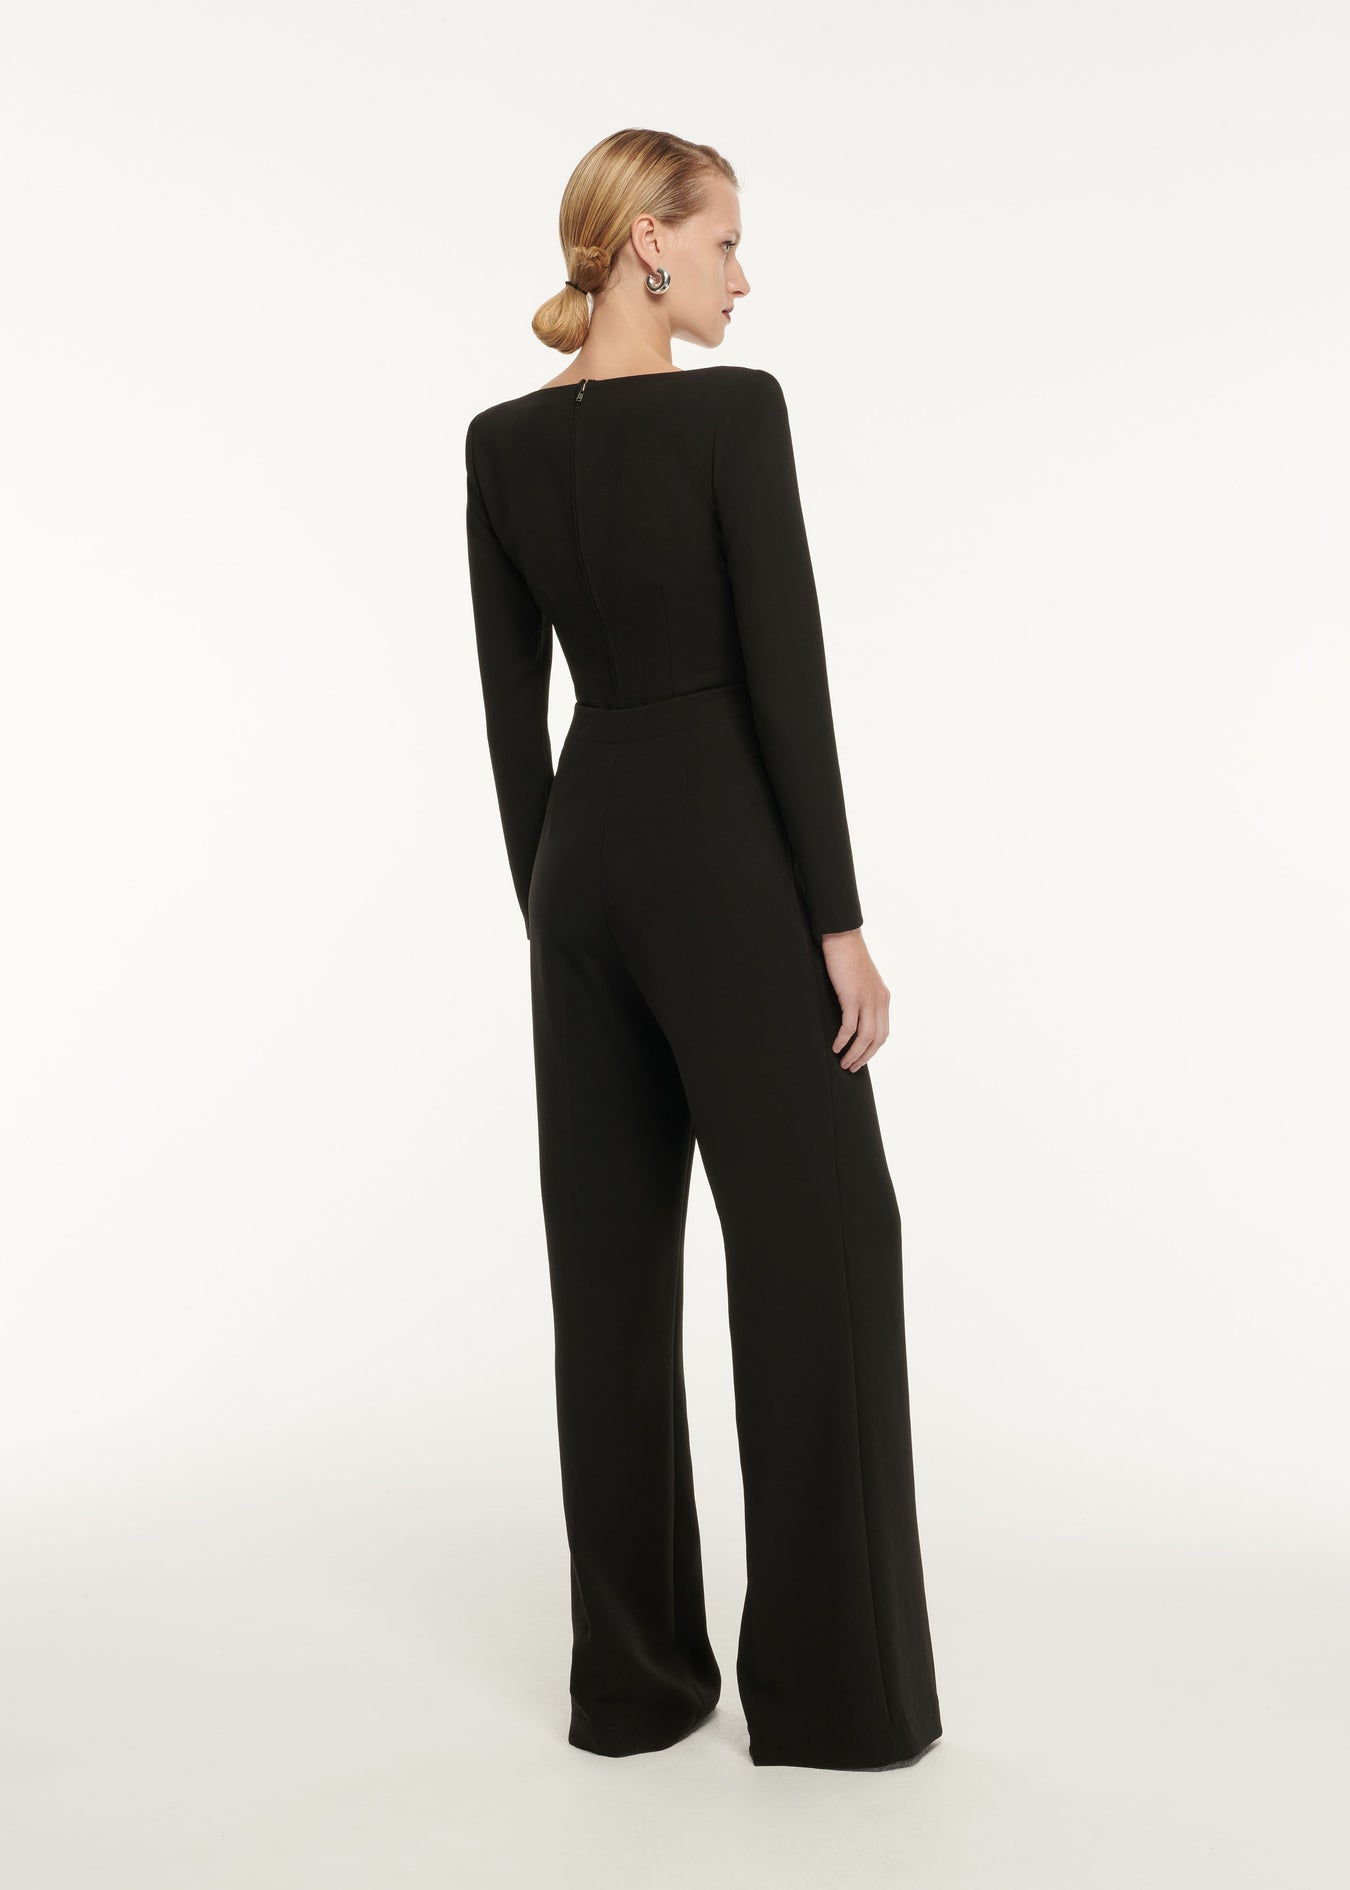 The back of a woman wearing the Wool Crepe Midi Dress Black